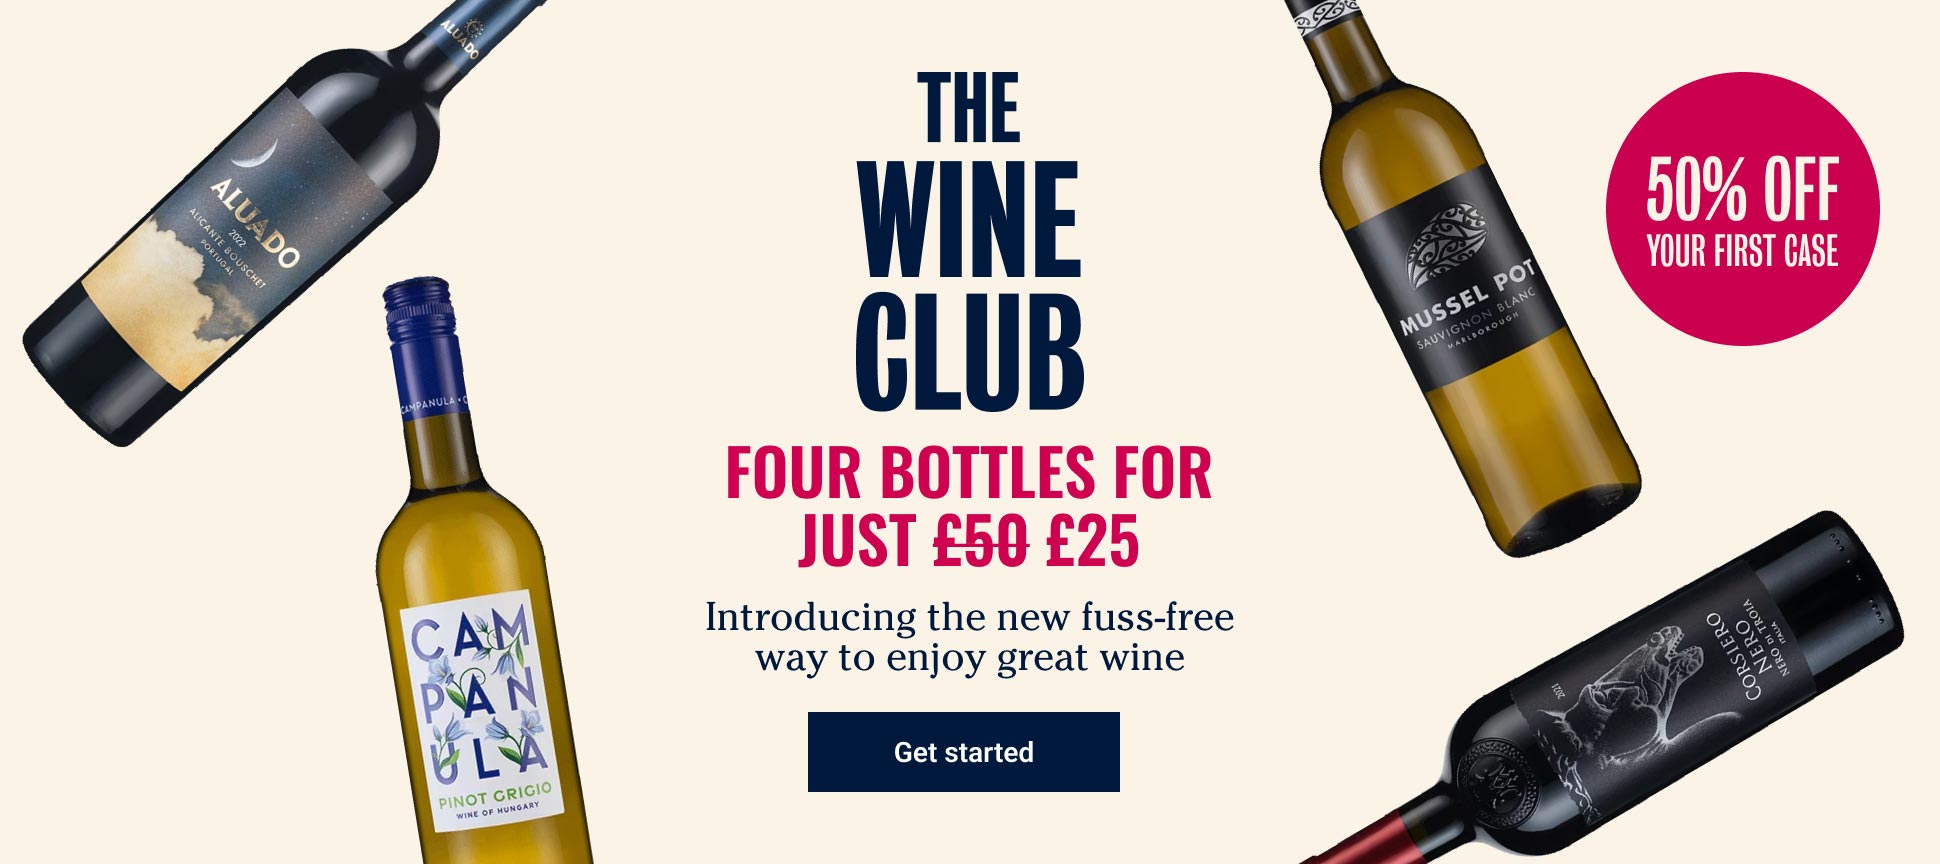 Four bottles for JUST £25 - LW